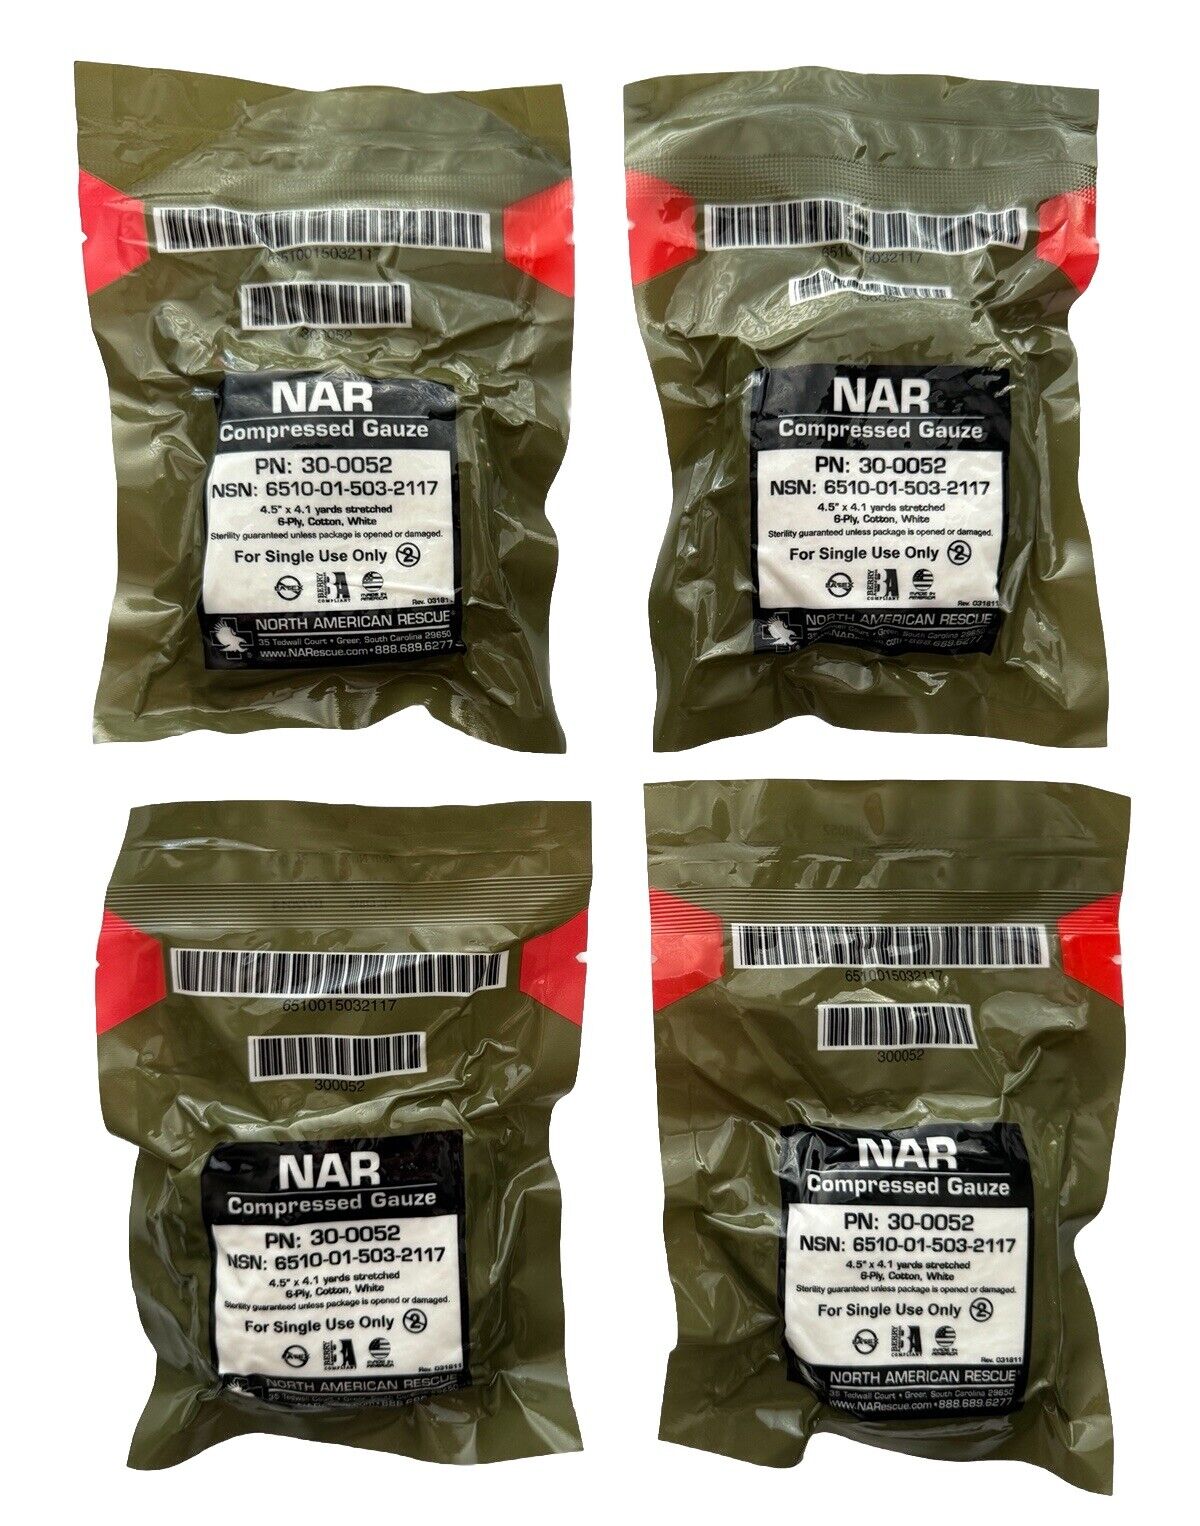 North American Rescue NAR Compressed Gauze IFAK Trauma Supplies New (4-Pack)